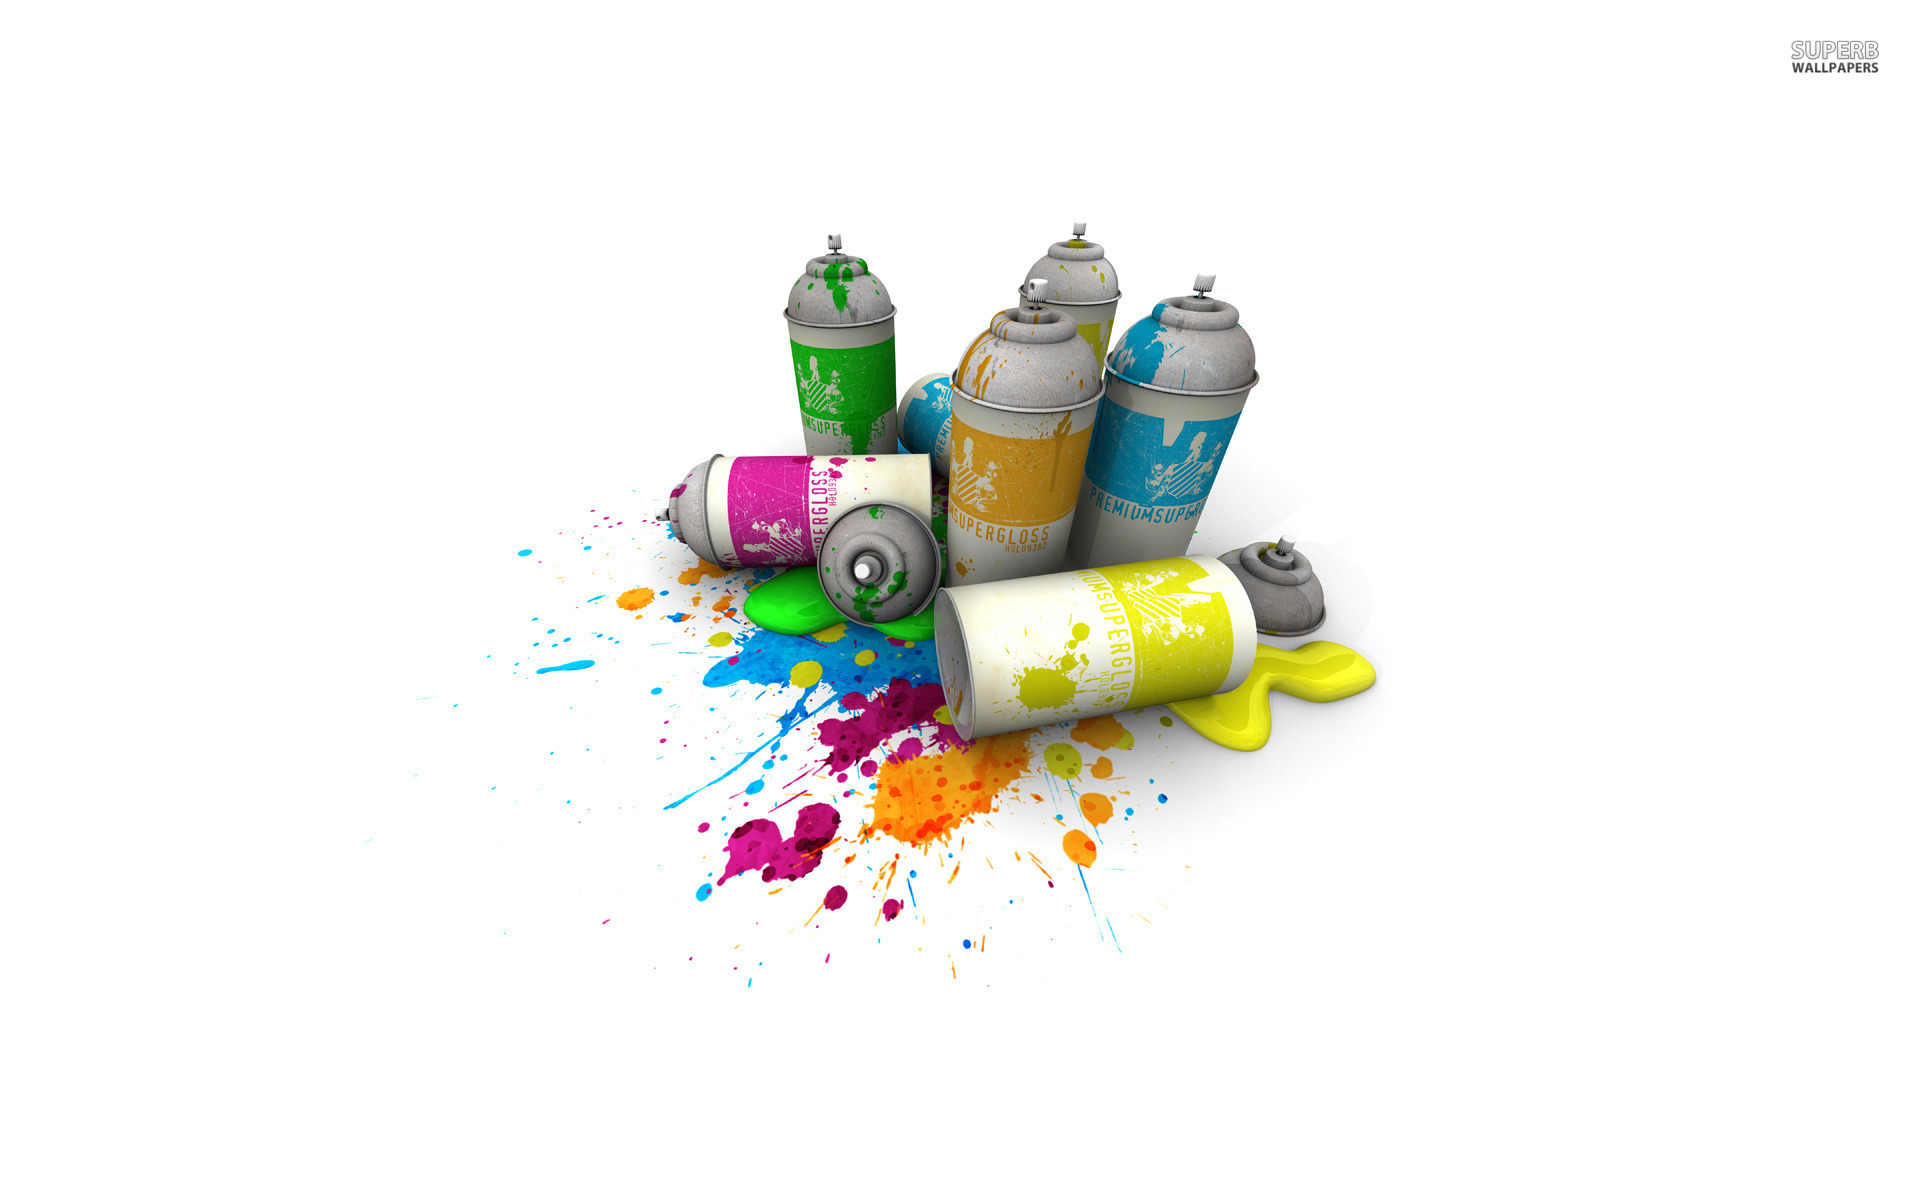 High Quality Spray Paint Wallpaper | Full HD Pictures